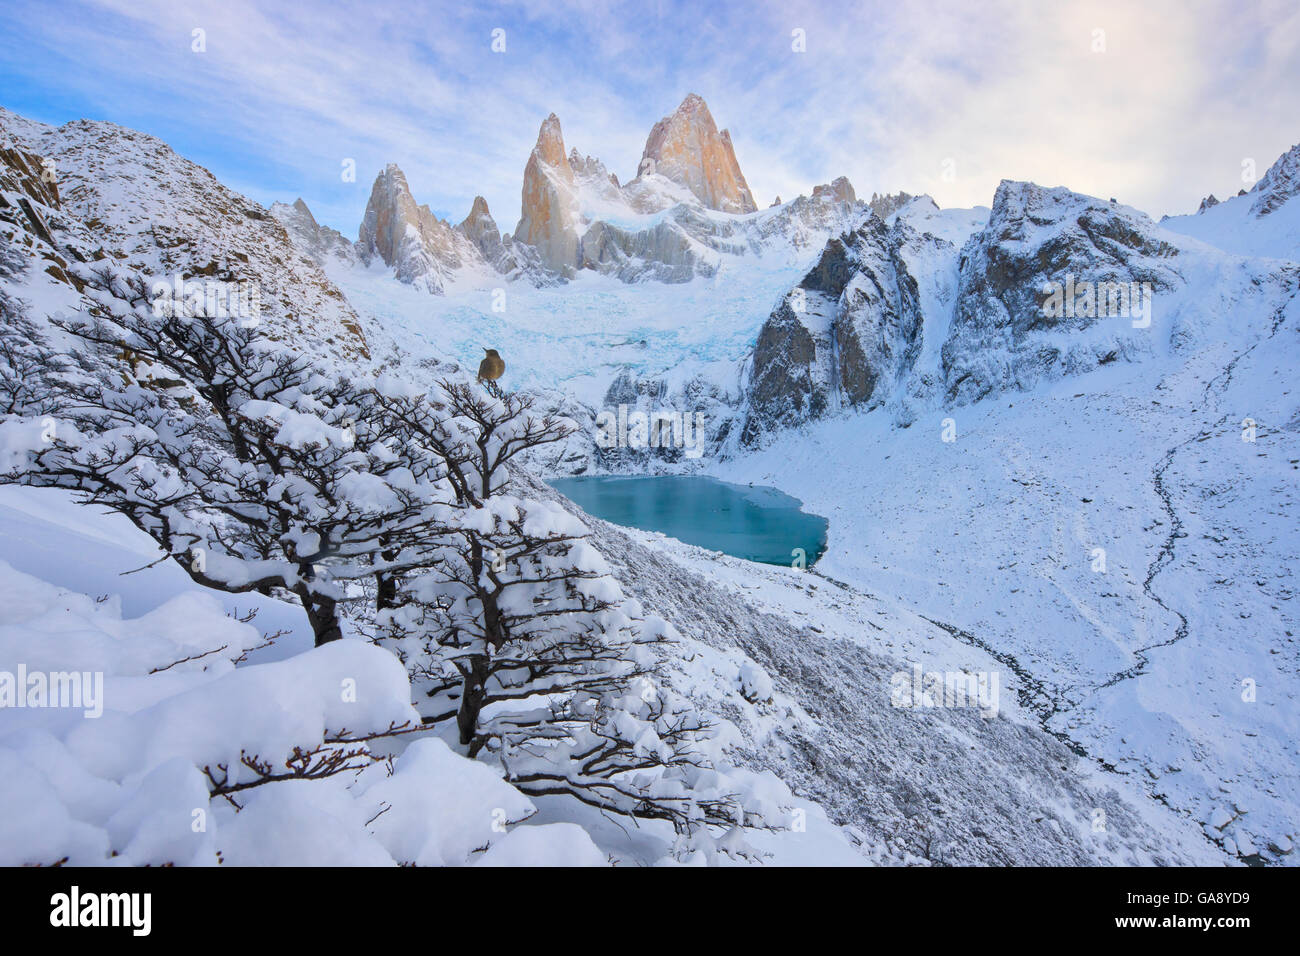 Black-billed shrike-tyrant (Agriornis montanus) perched in snowy tree with Mount Fitz Roy visible beyond. Patagonia, Argentina, June 2014. Finalist in the Land Category of the Wildlife Photographer of the Year (WPOY) Competition Awards 2015 Stock Photo